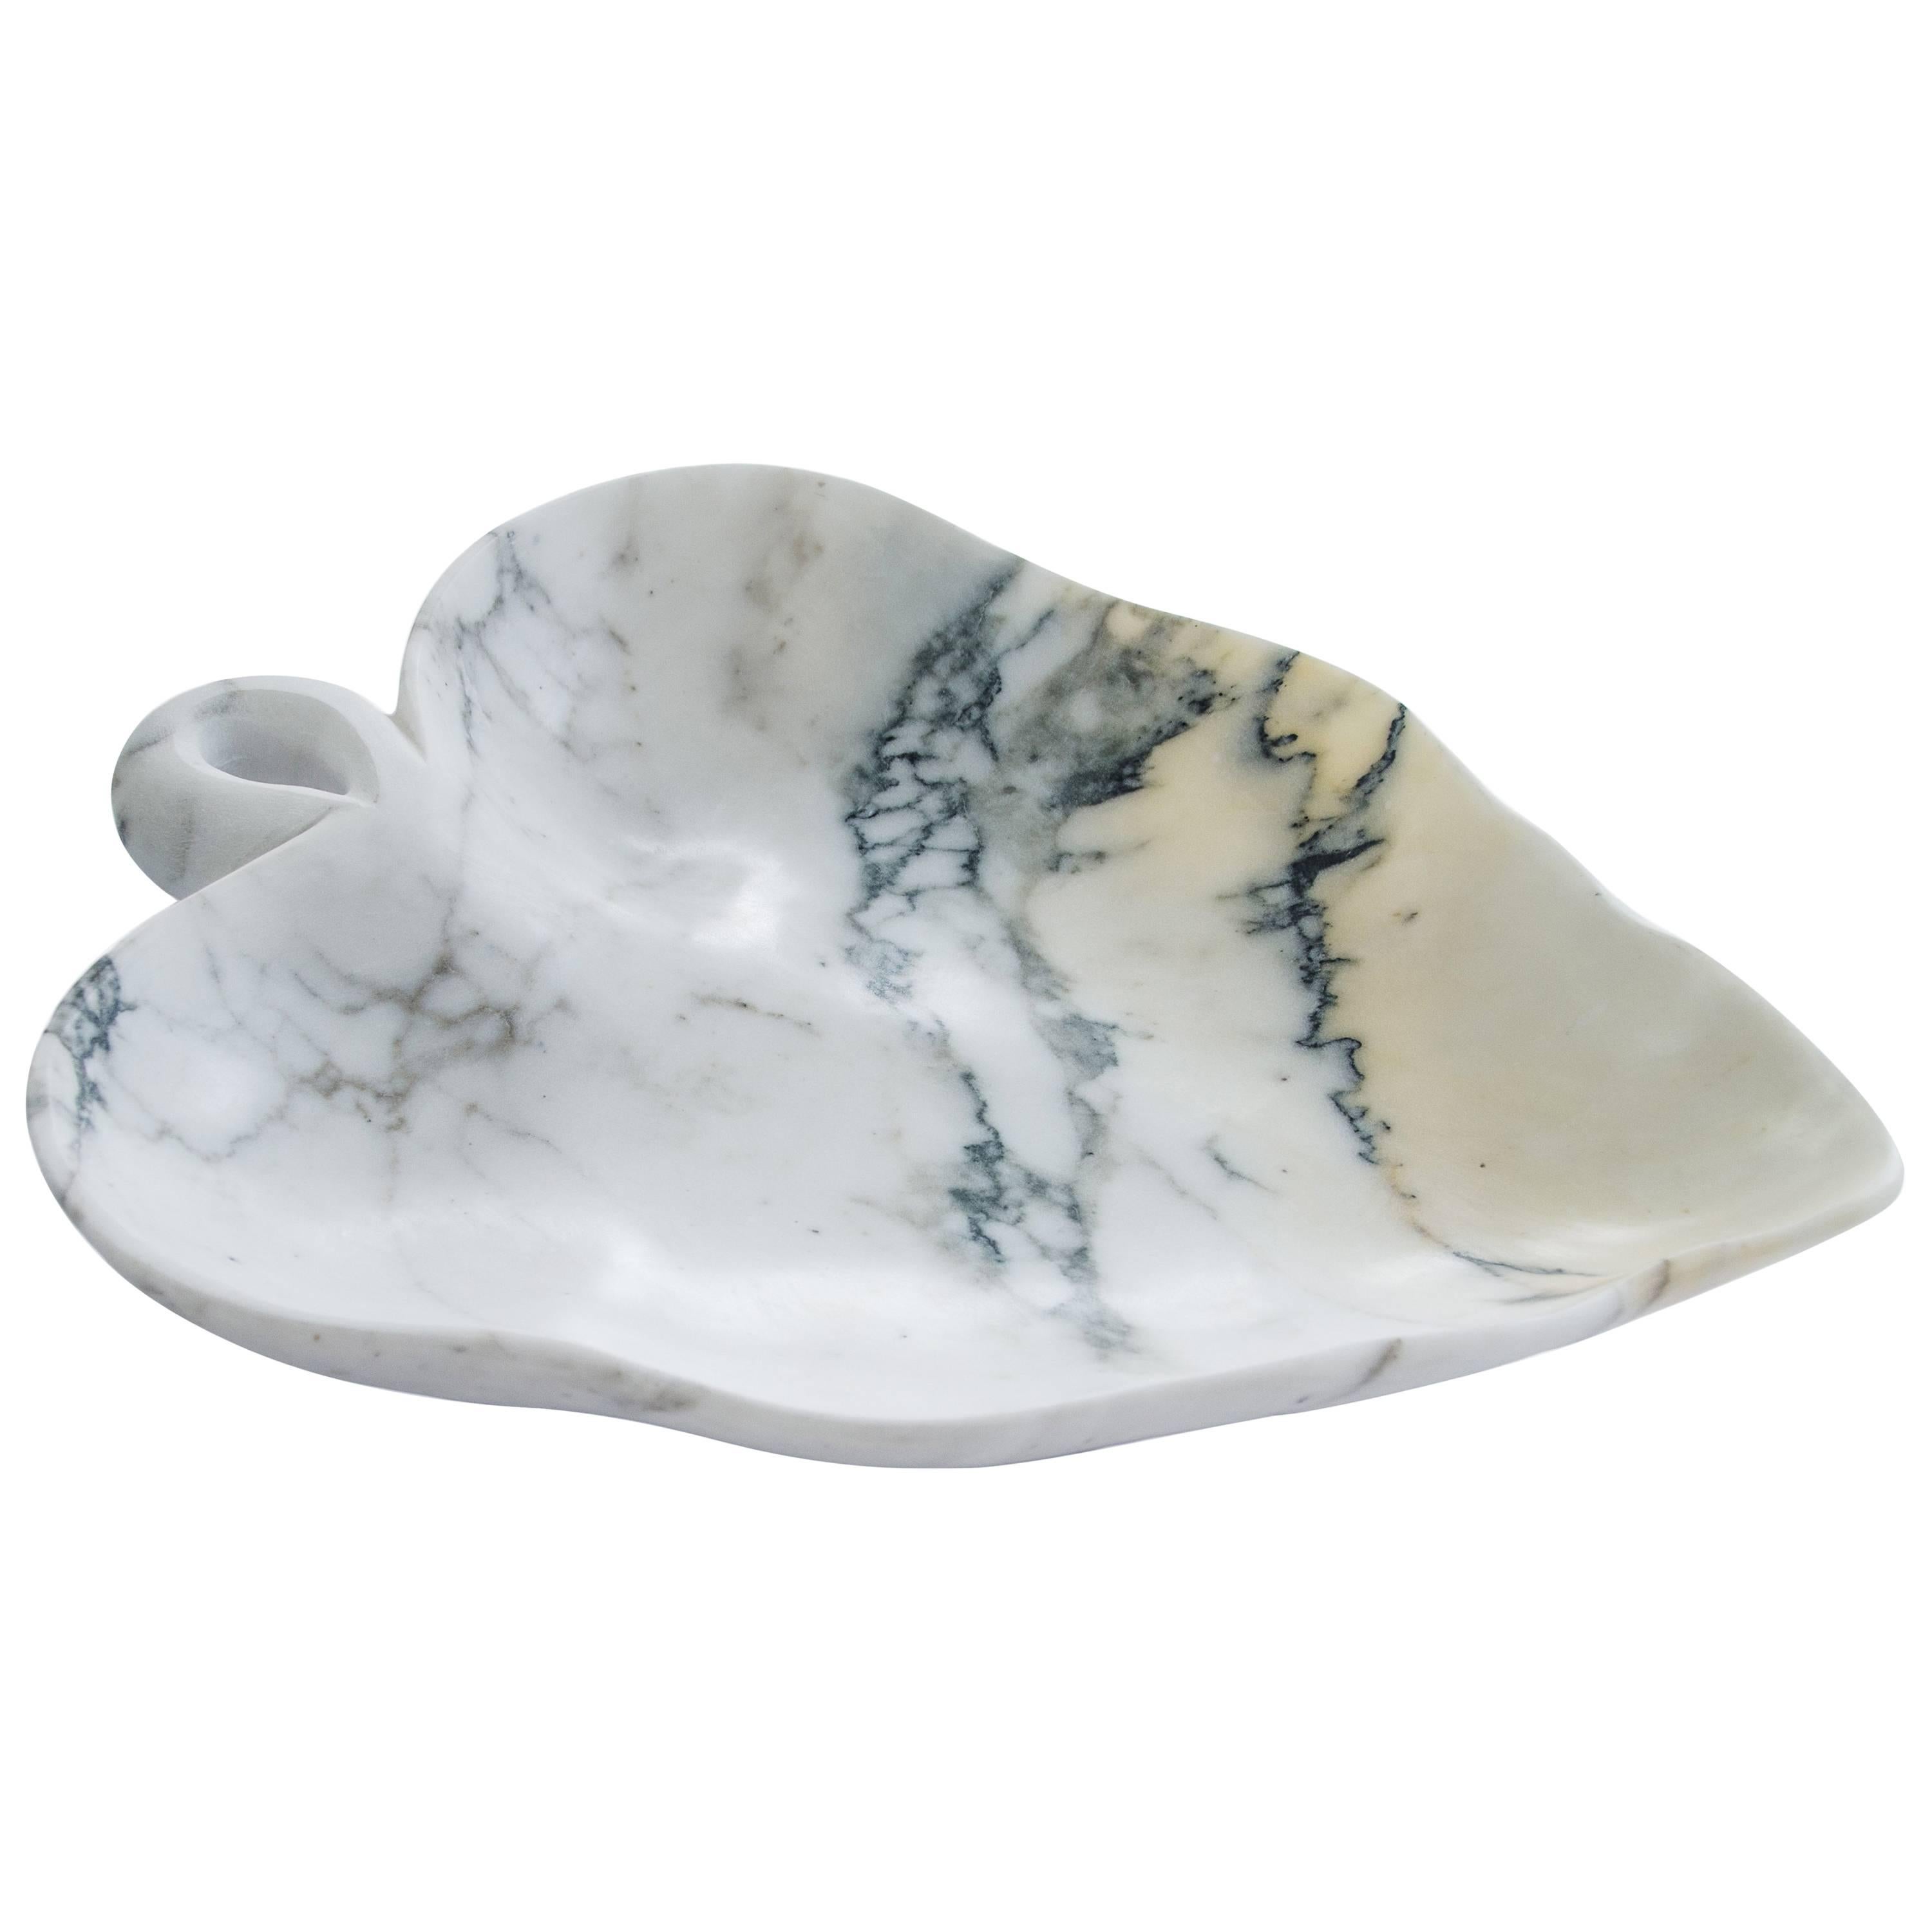 Big Leaf Bowl in Paonazzo Marble Handmade in Italy